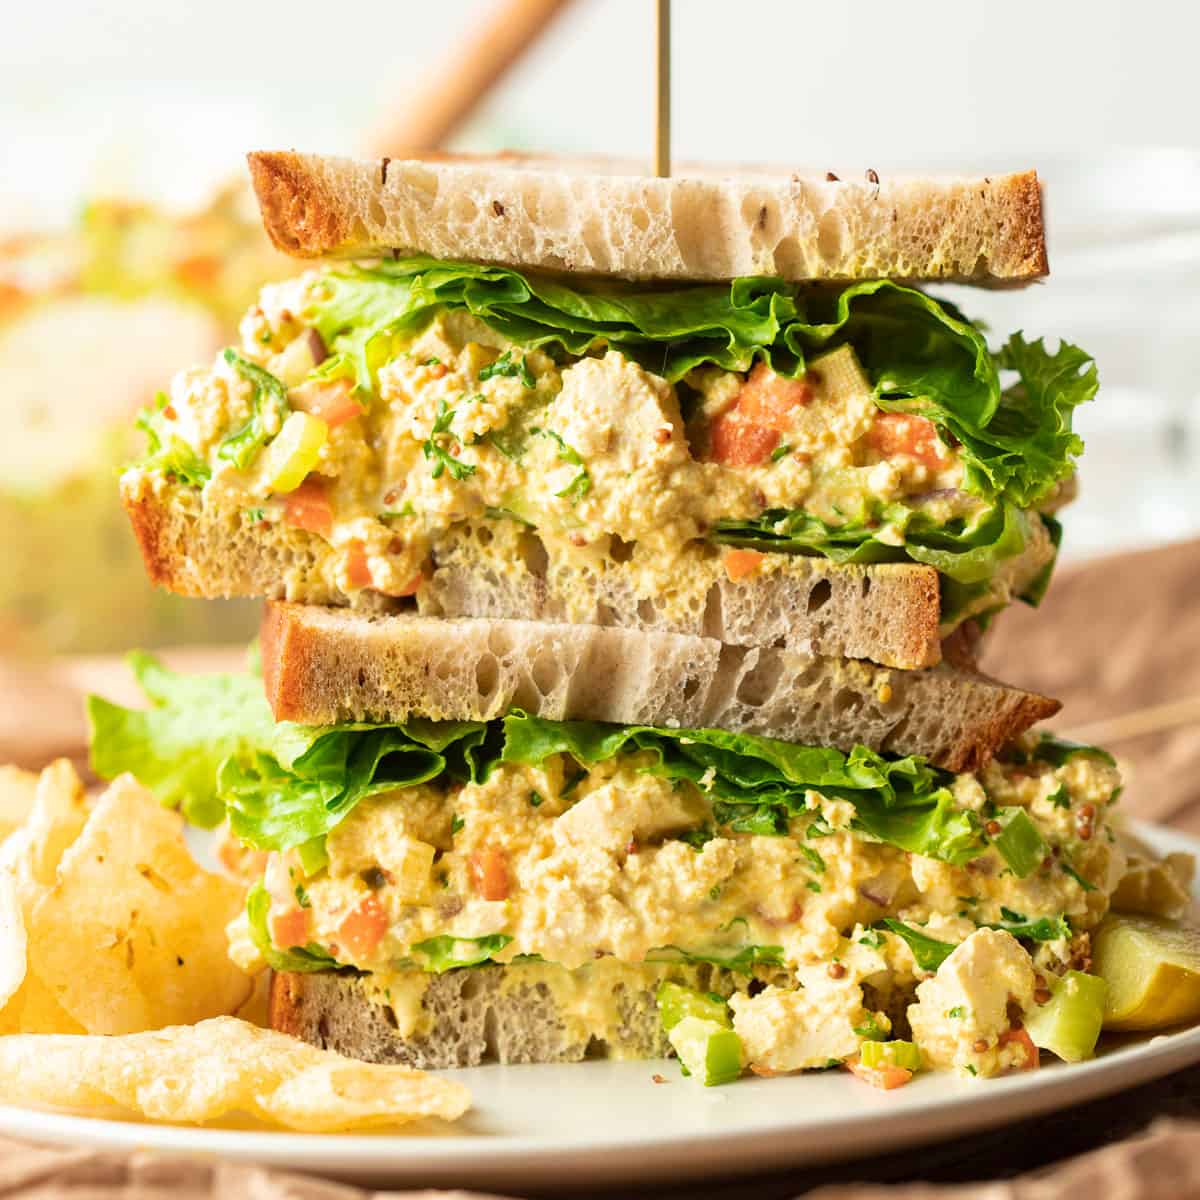 Two halves of a vegan egg salad sandwich are stacked on a plate.